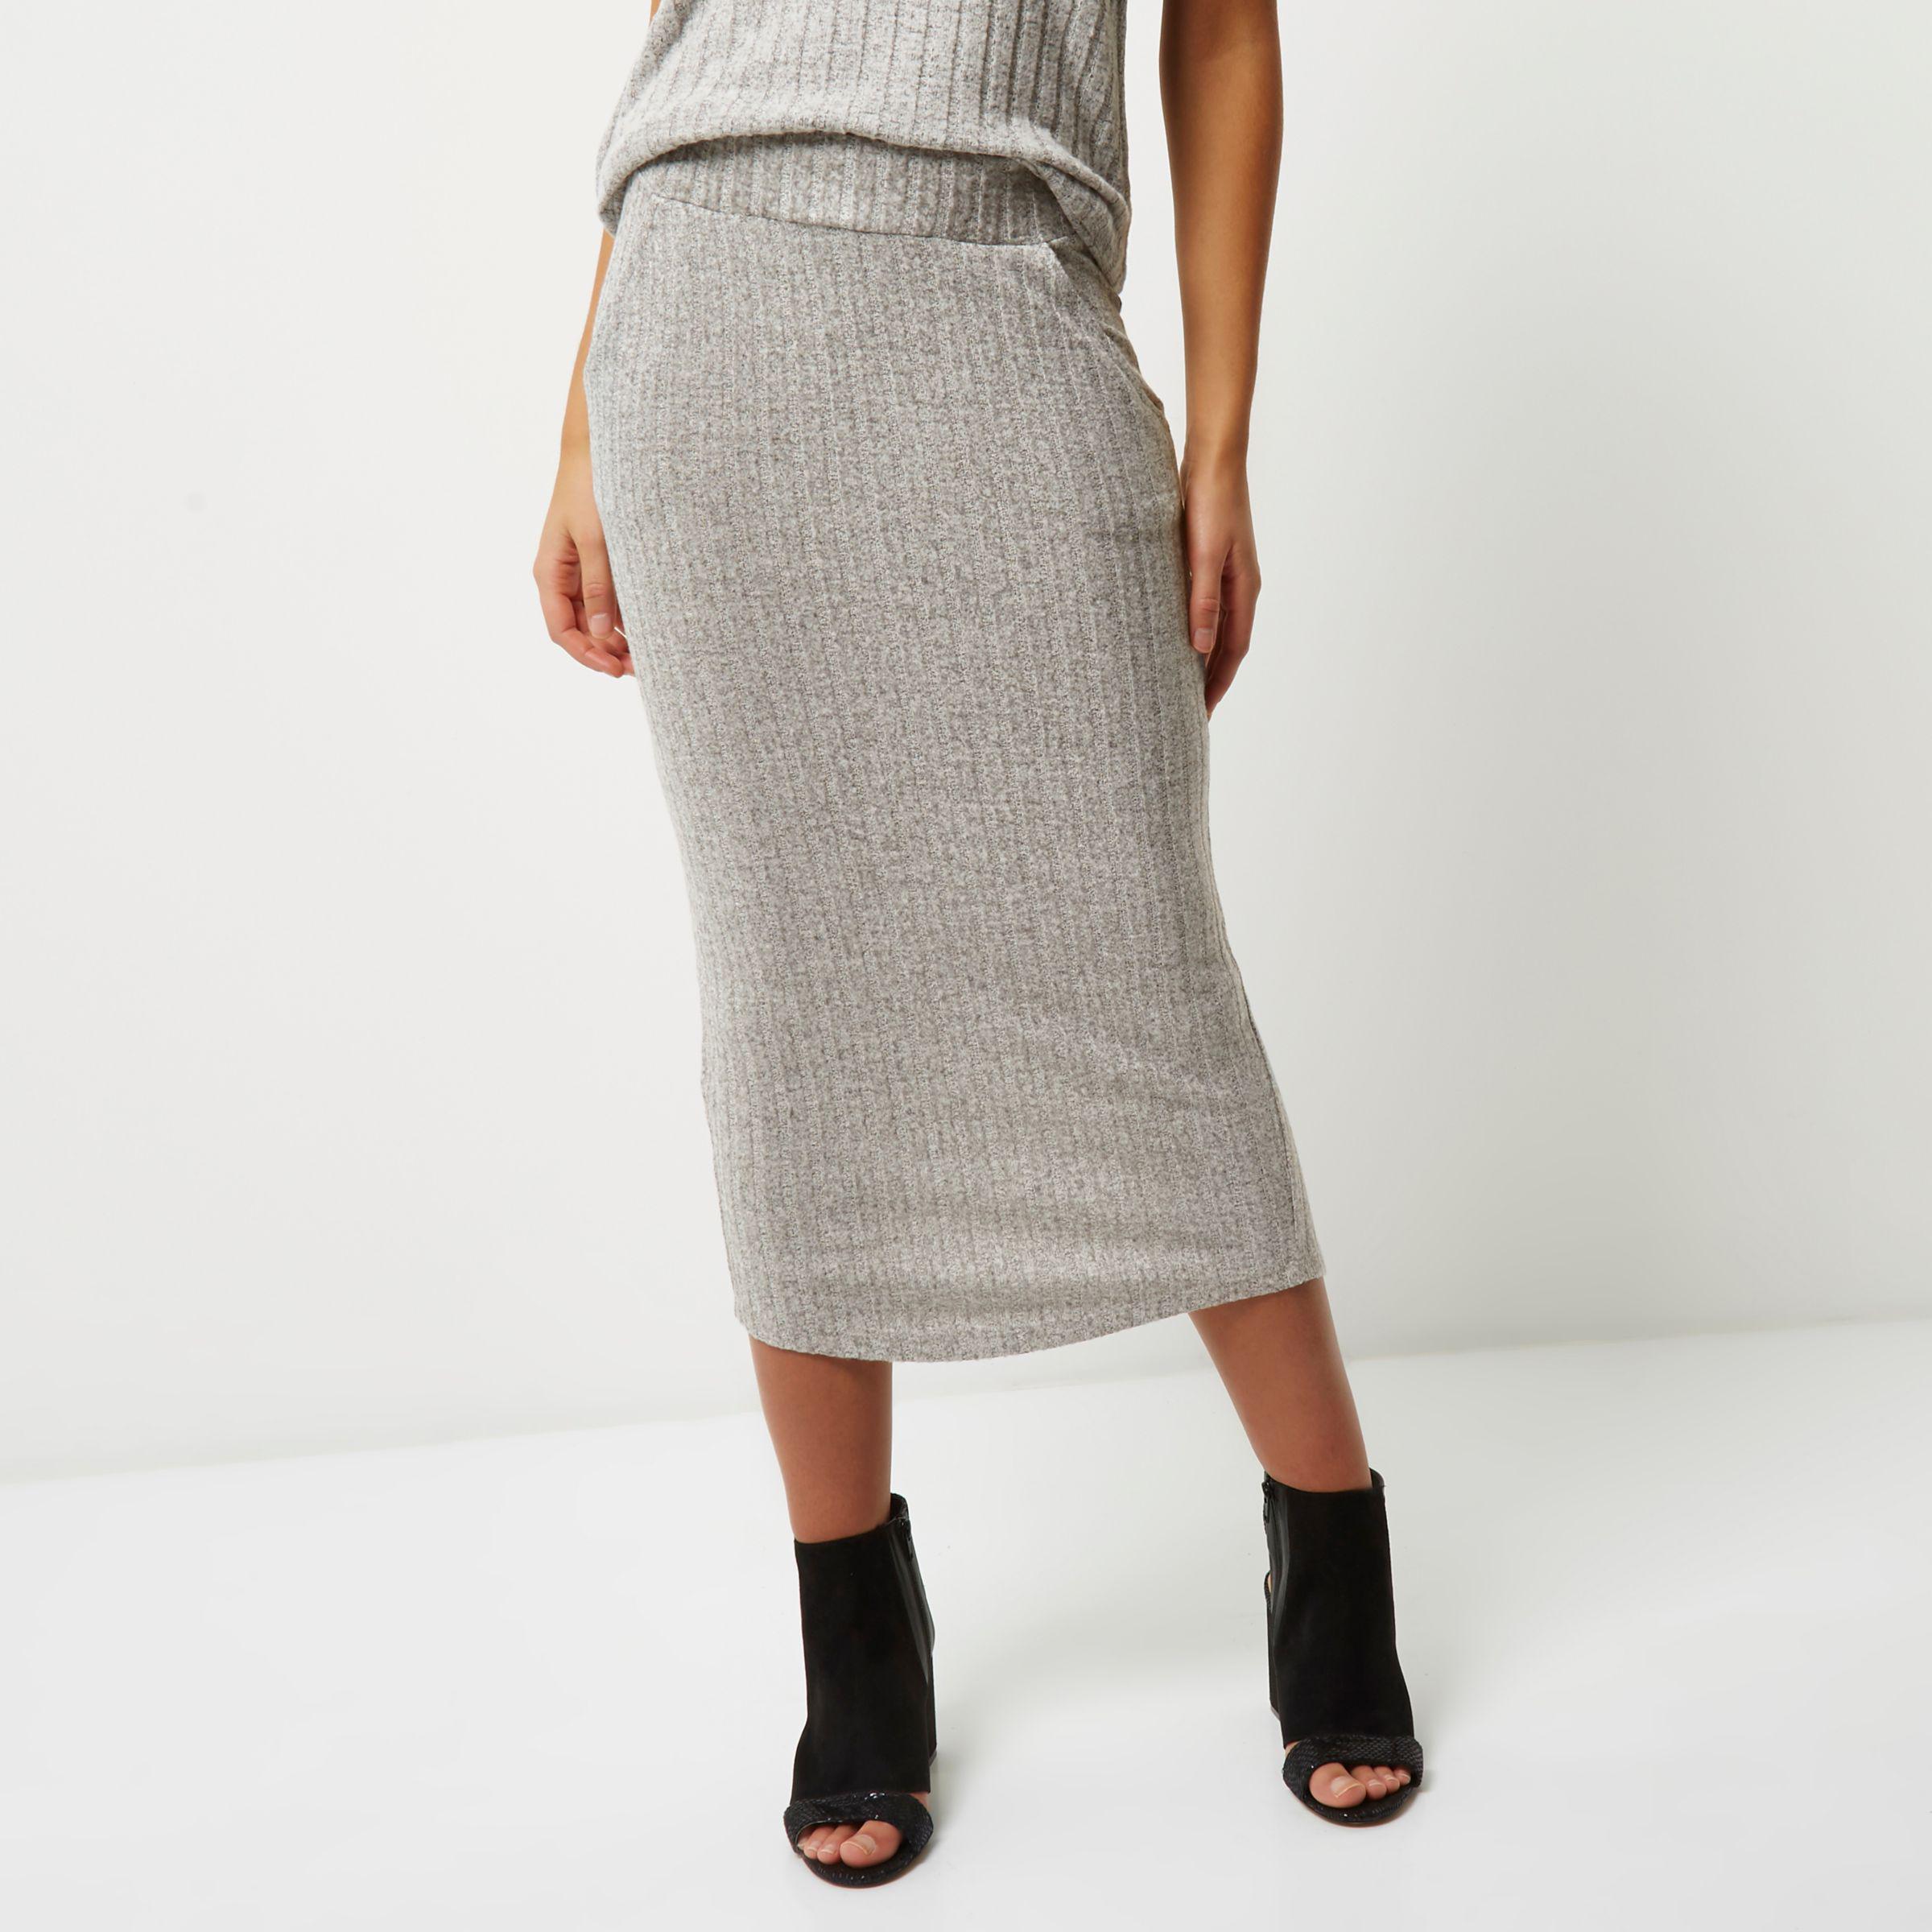 River Island Synthetic Grey Ribbed Knit Midi Skirt in Gray - Lyst